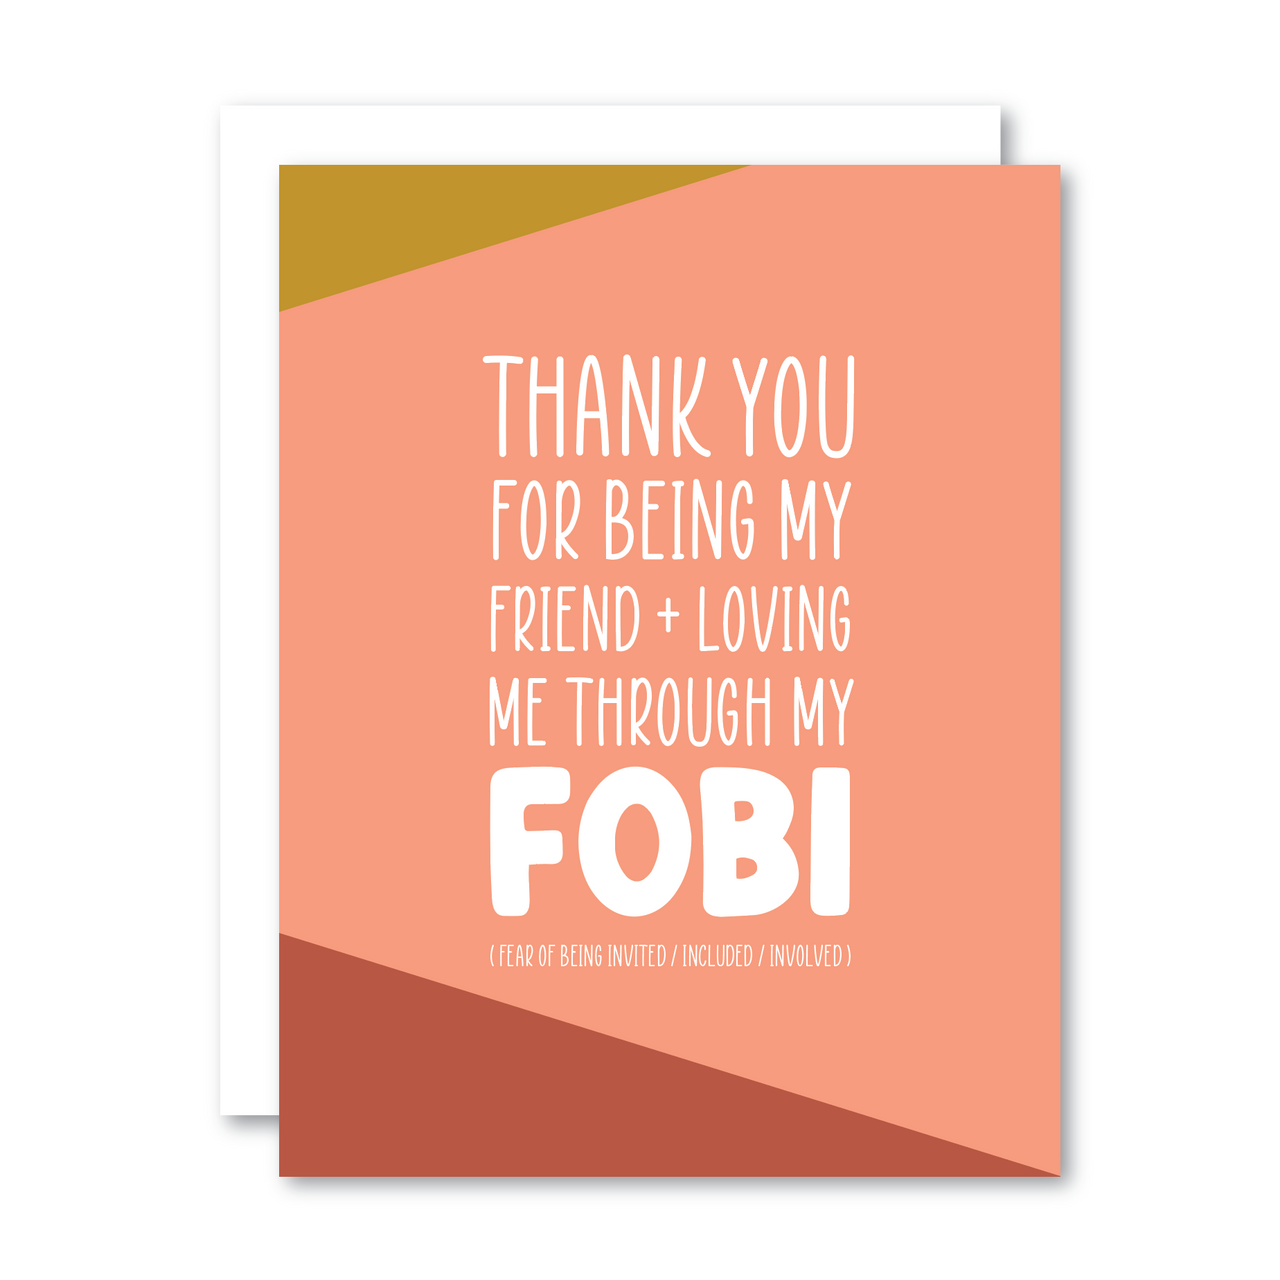 Thank you For Being My Friend + Loving Me Through my FOBI